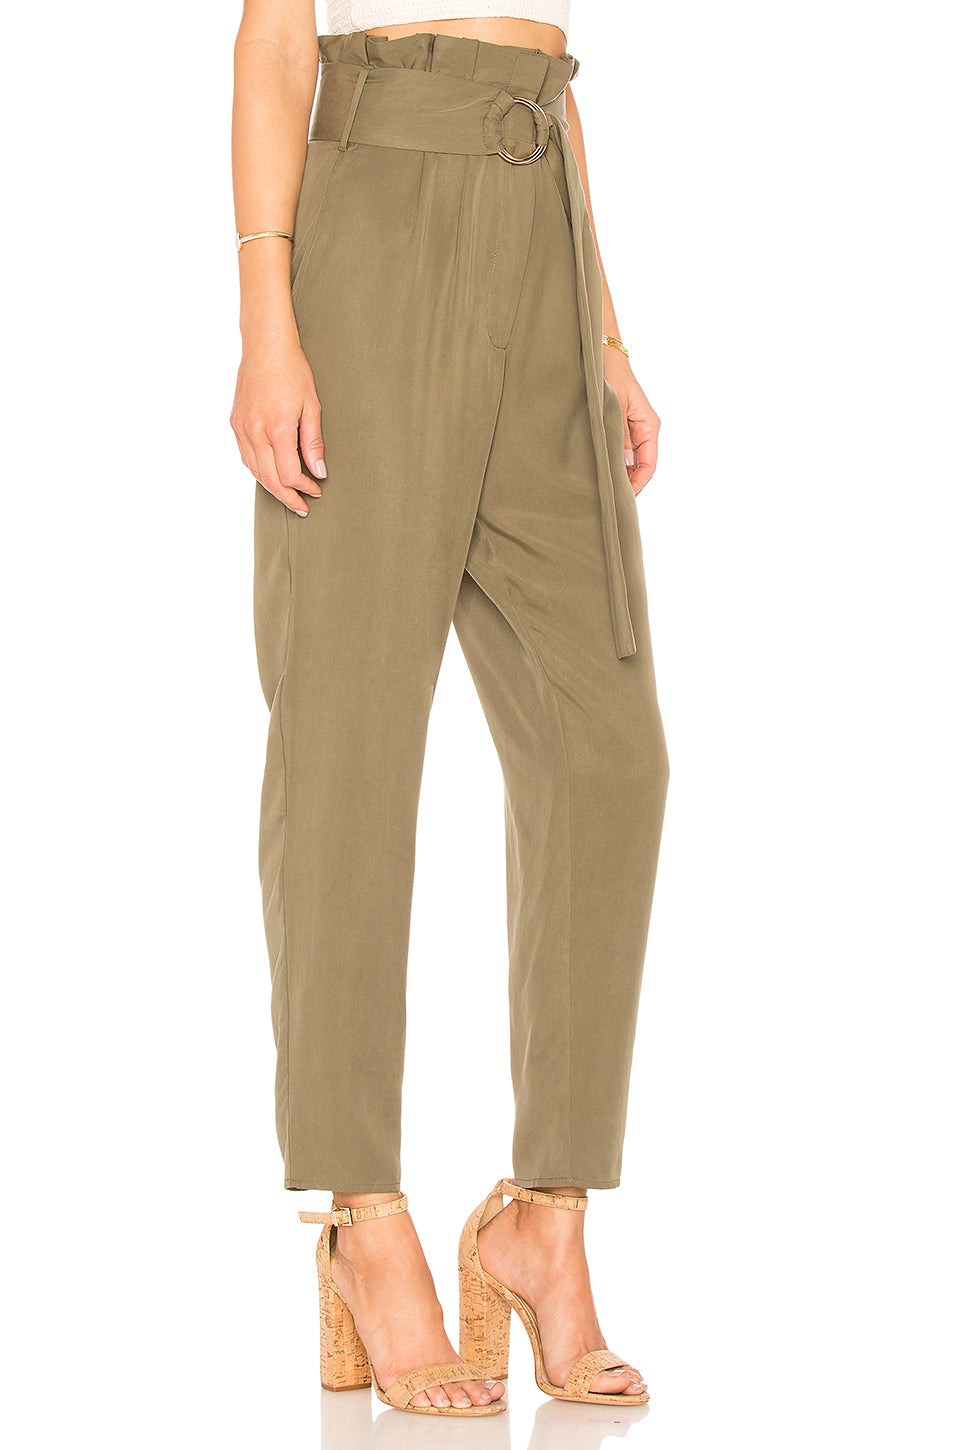 Greyson Trouser in OLIVE